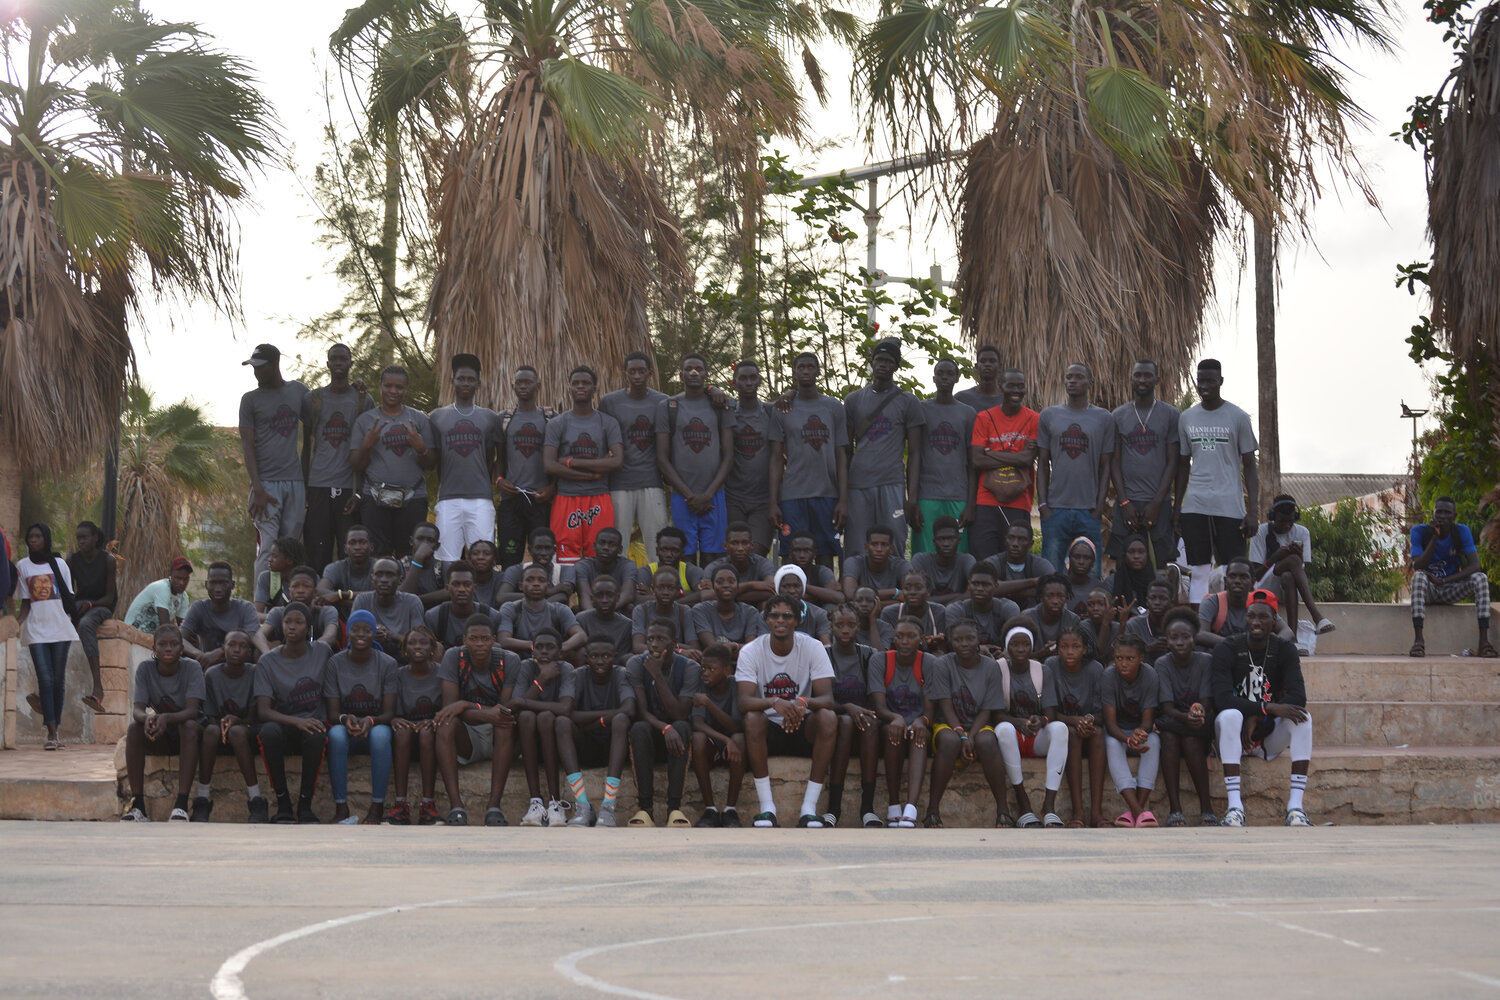 Former Manhattan College men’s basketball player Samba Diallo has always felt a deep loyalty to his homeland of Senegal. He took that meaning to another level in 2021 when he started the RUFISQUE MADE basketball camp in his home city of Rufisque. Come July, he will return to his old stomping grounds with another chance to mentor and give back to the youth.